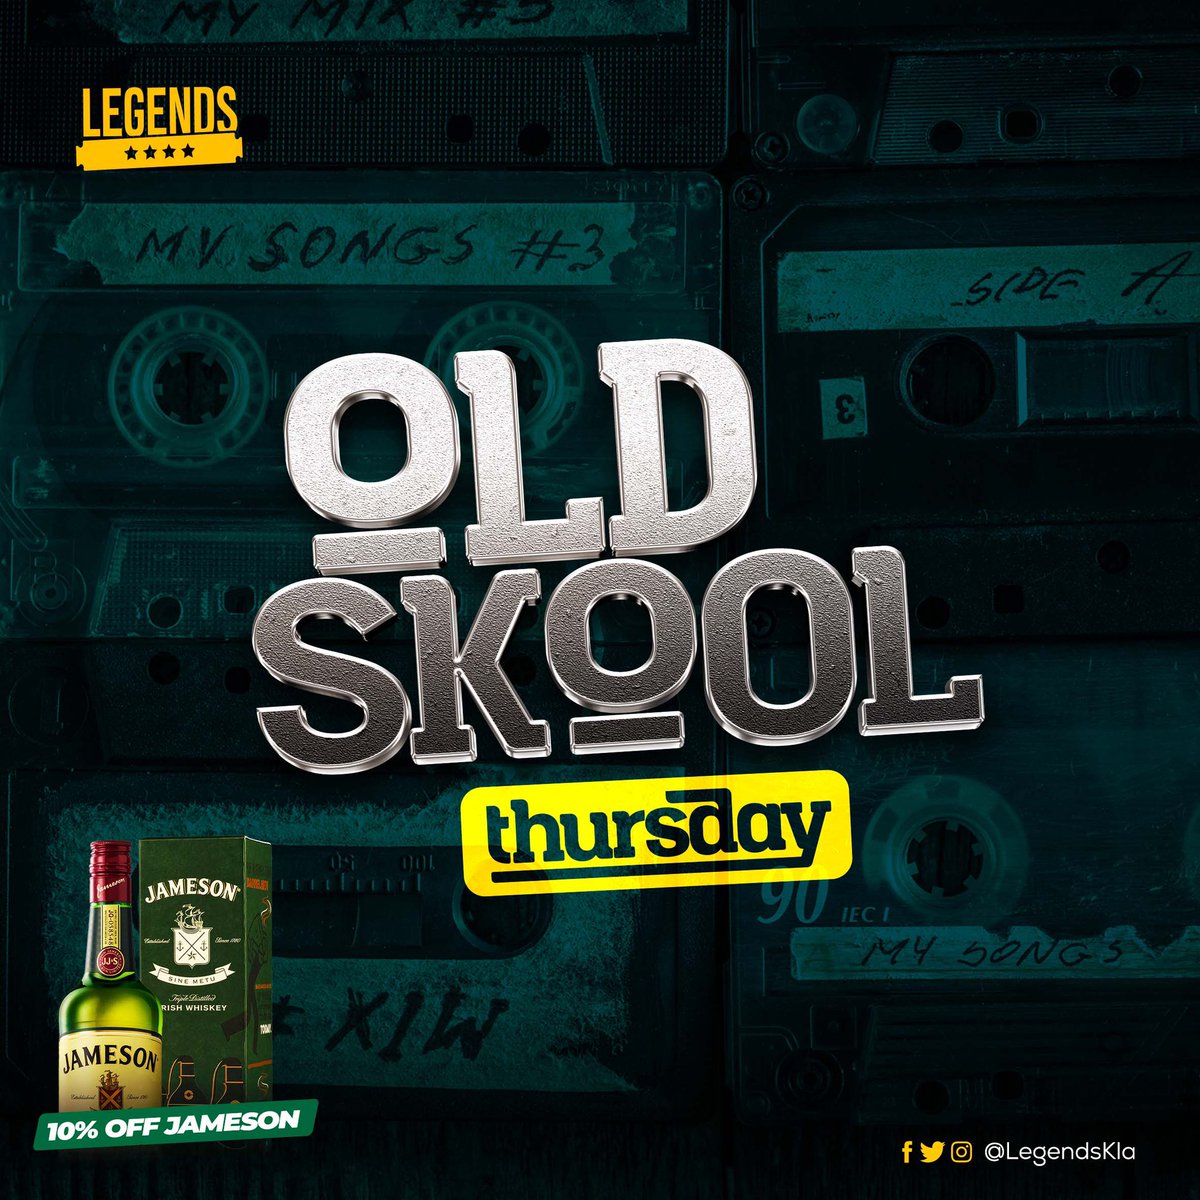 Let's turn back time and relive the good old days with our ultimate playlist of classic hits!
Come join us for discounted drinks & great vibes in our #OldSkoolThursday party. 🔙🎶
#ThrowbackThursday #TBT